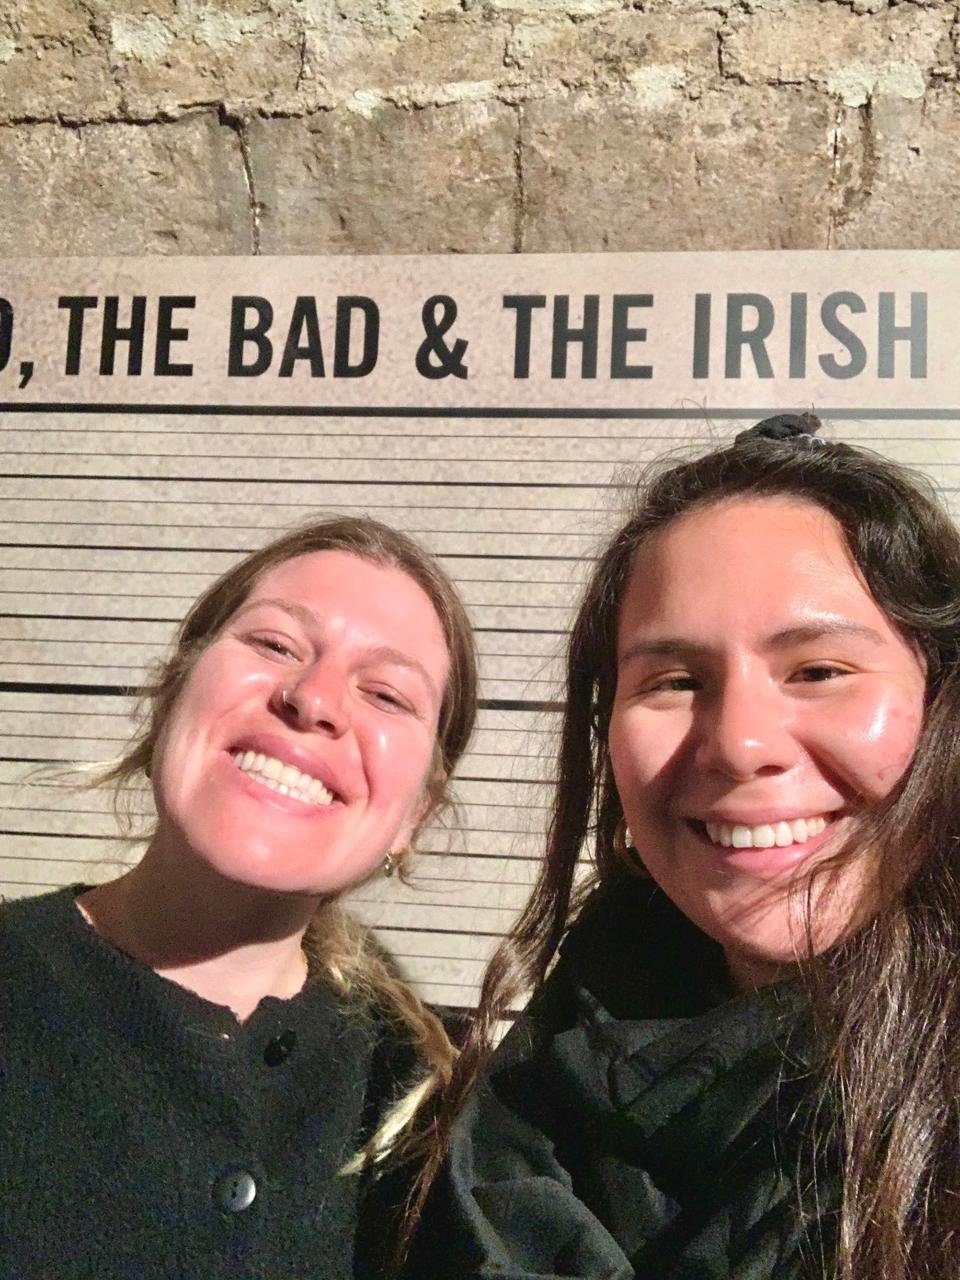 Andreia and Flavia smiling together in Dublin, Ireland.